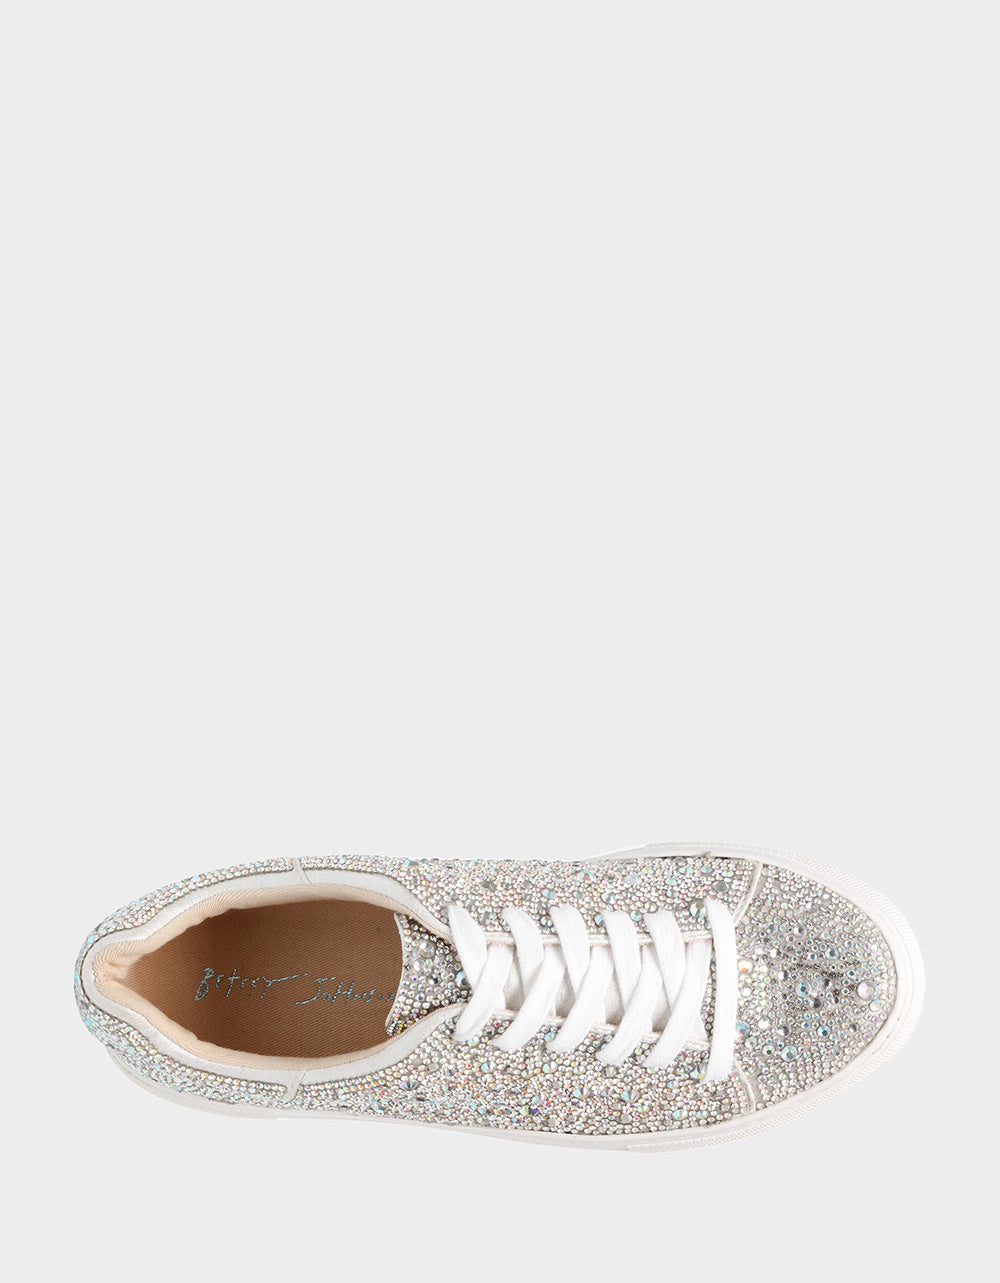 SIDNY RHINESTONES Lace Up Sneakers | Sparkly Rhinestone Sneakers ...